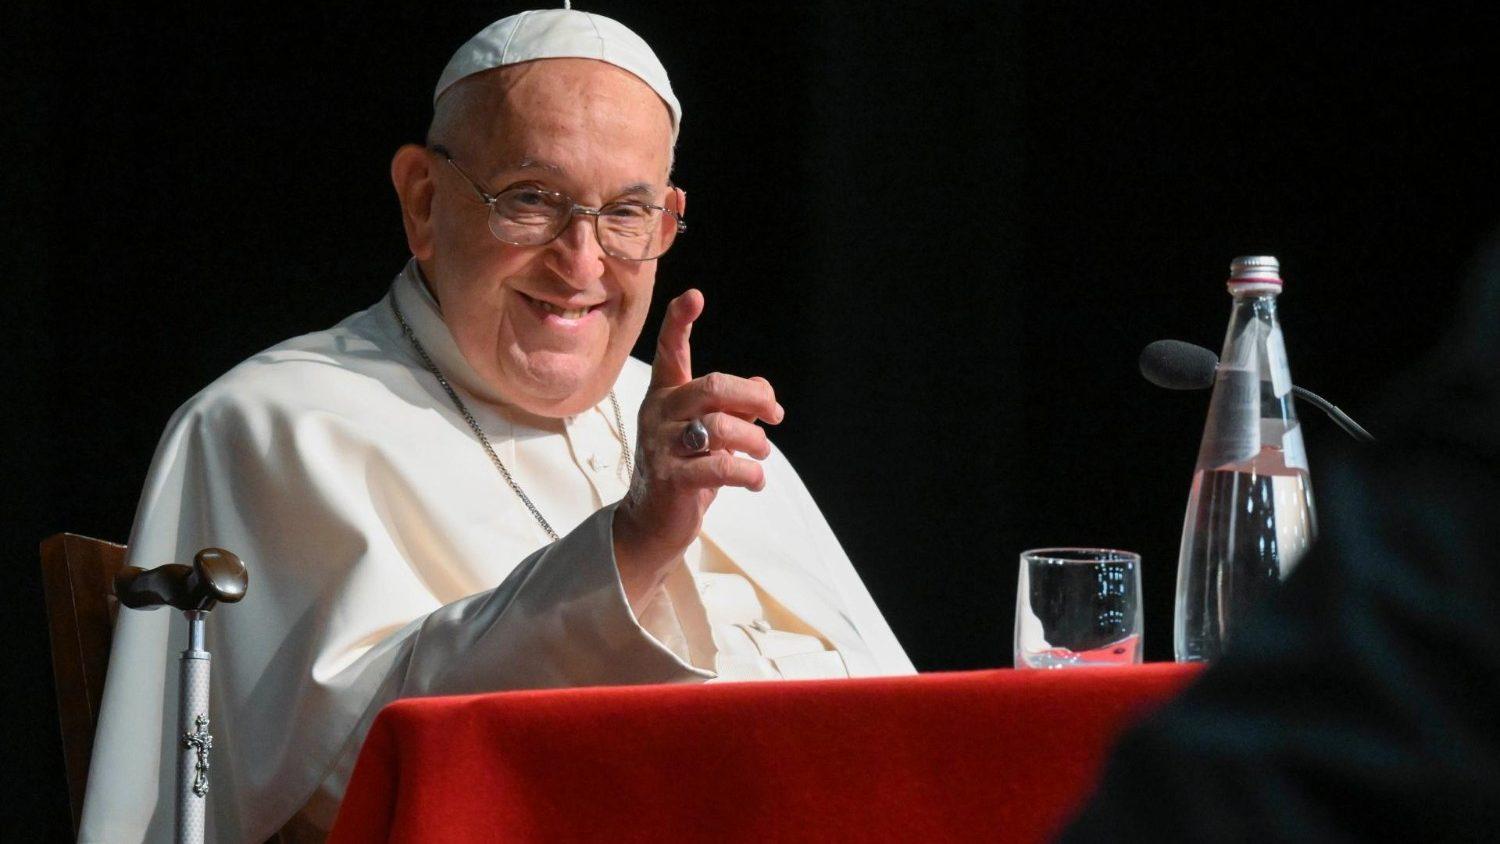 Pope Francis reportedly uses offensive term for homosexuality a second time